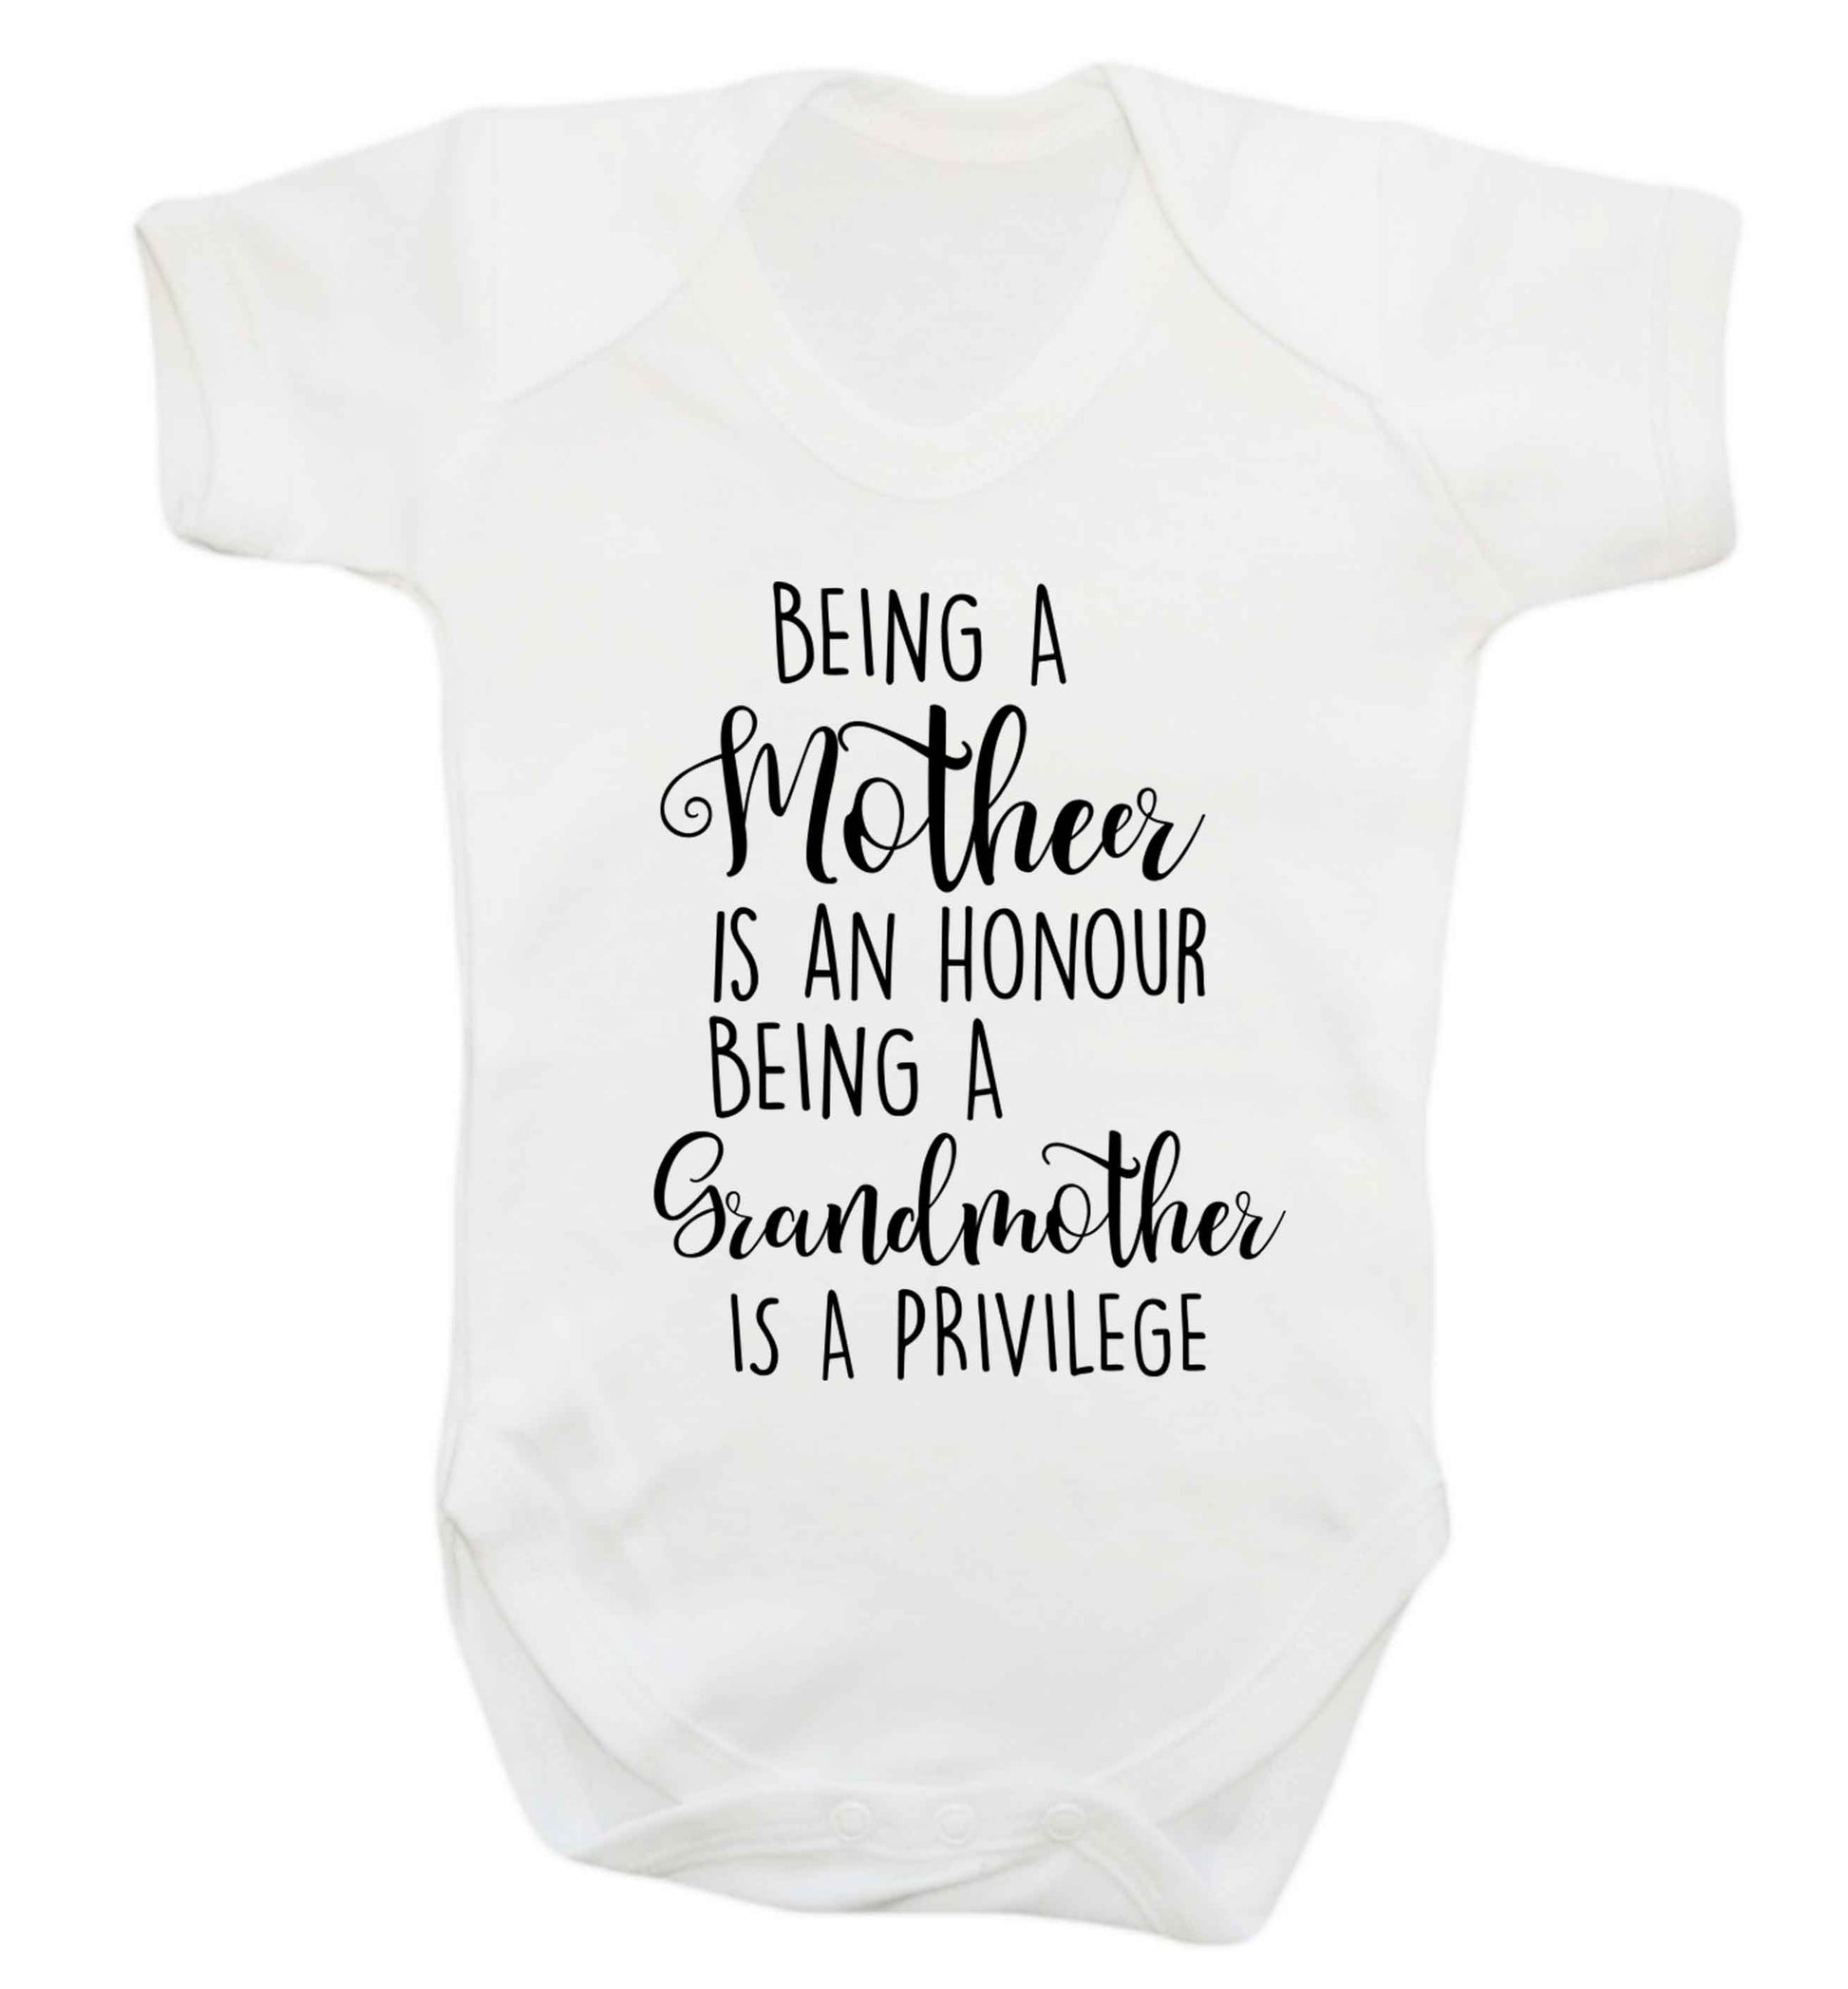 Being a mother is an honour being an grandmother is a privilege Baby Vest white 18-24 months